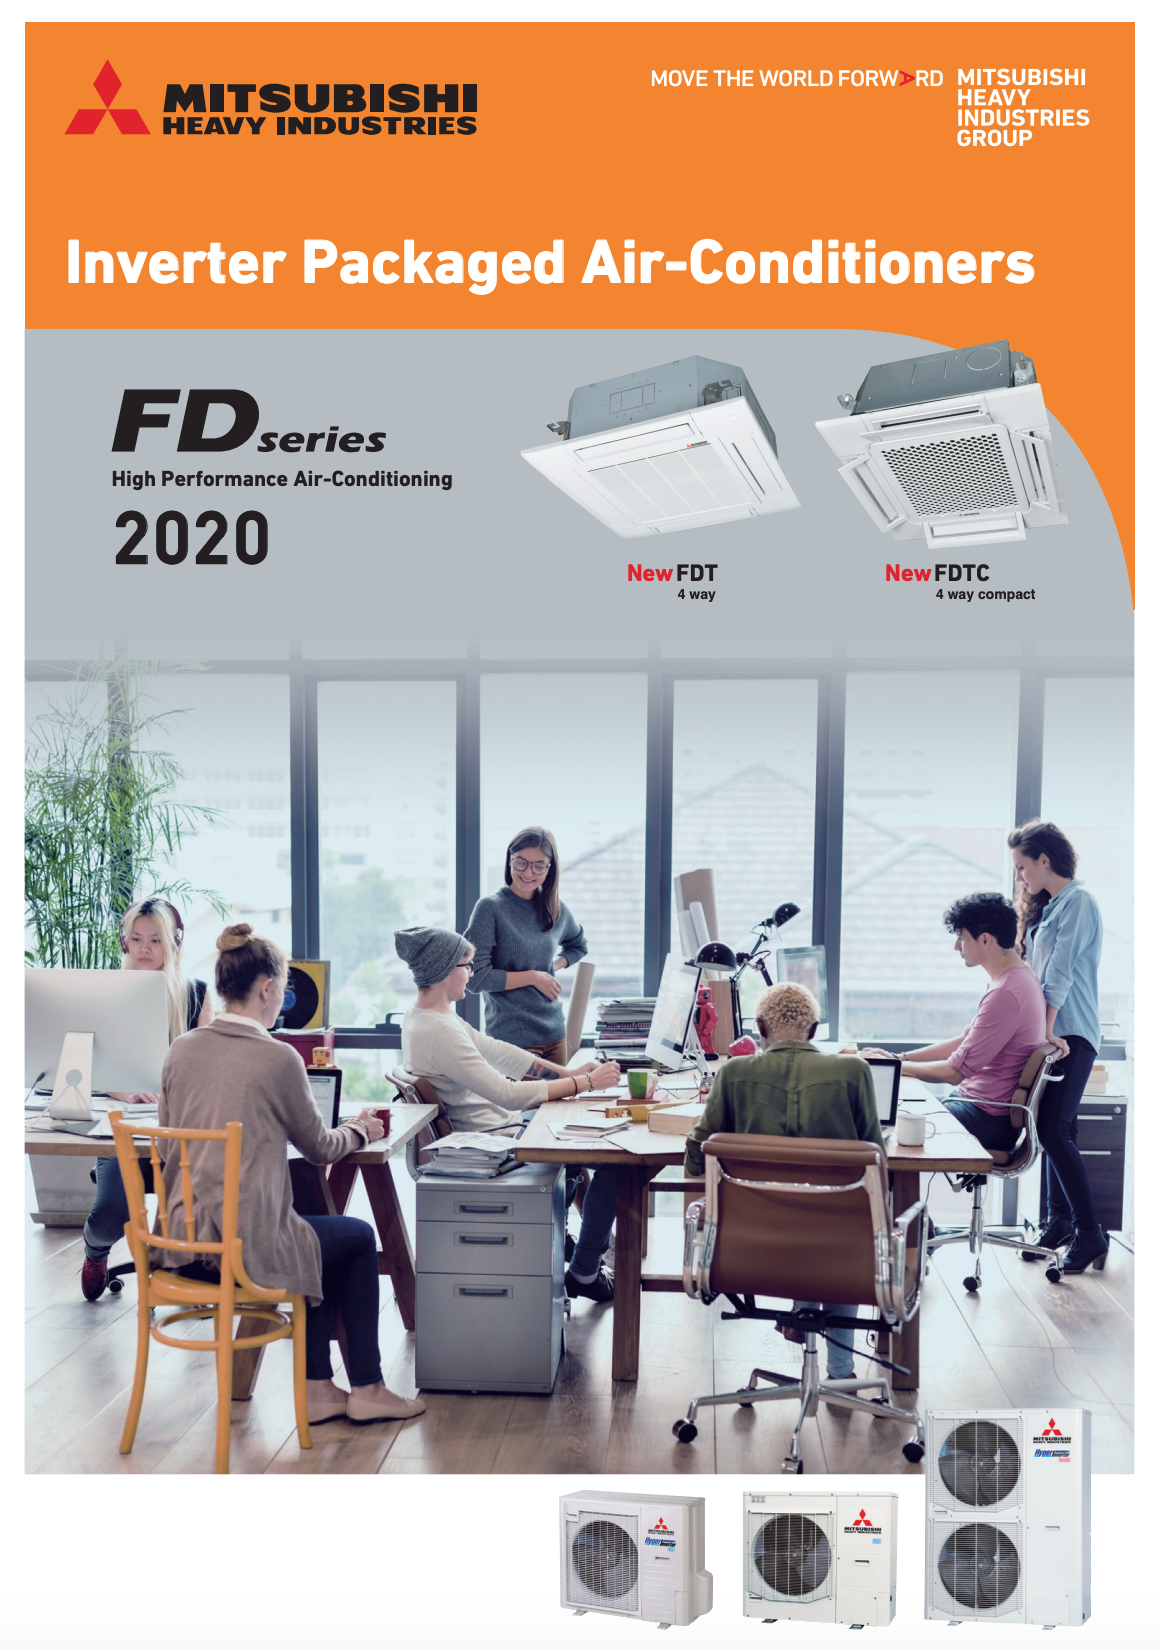 FD Series Inverter Packaged Air Conditioners 2020